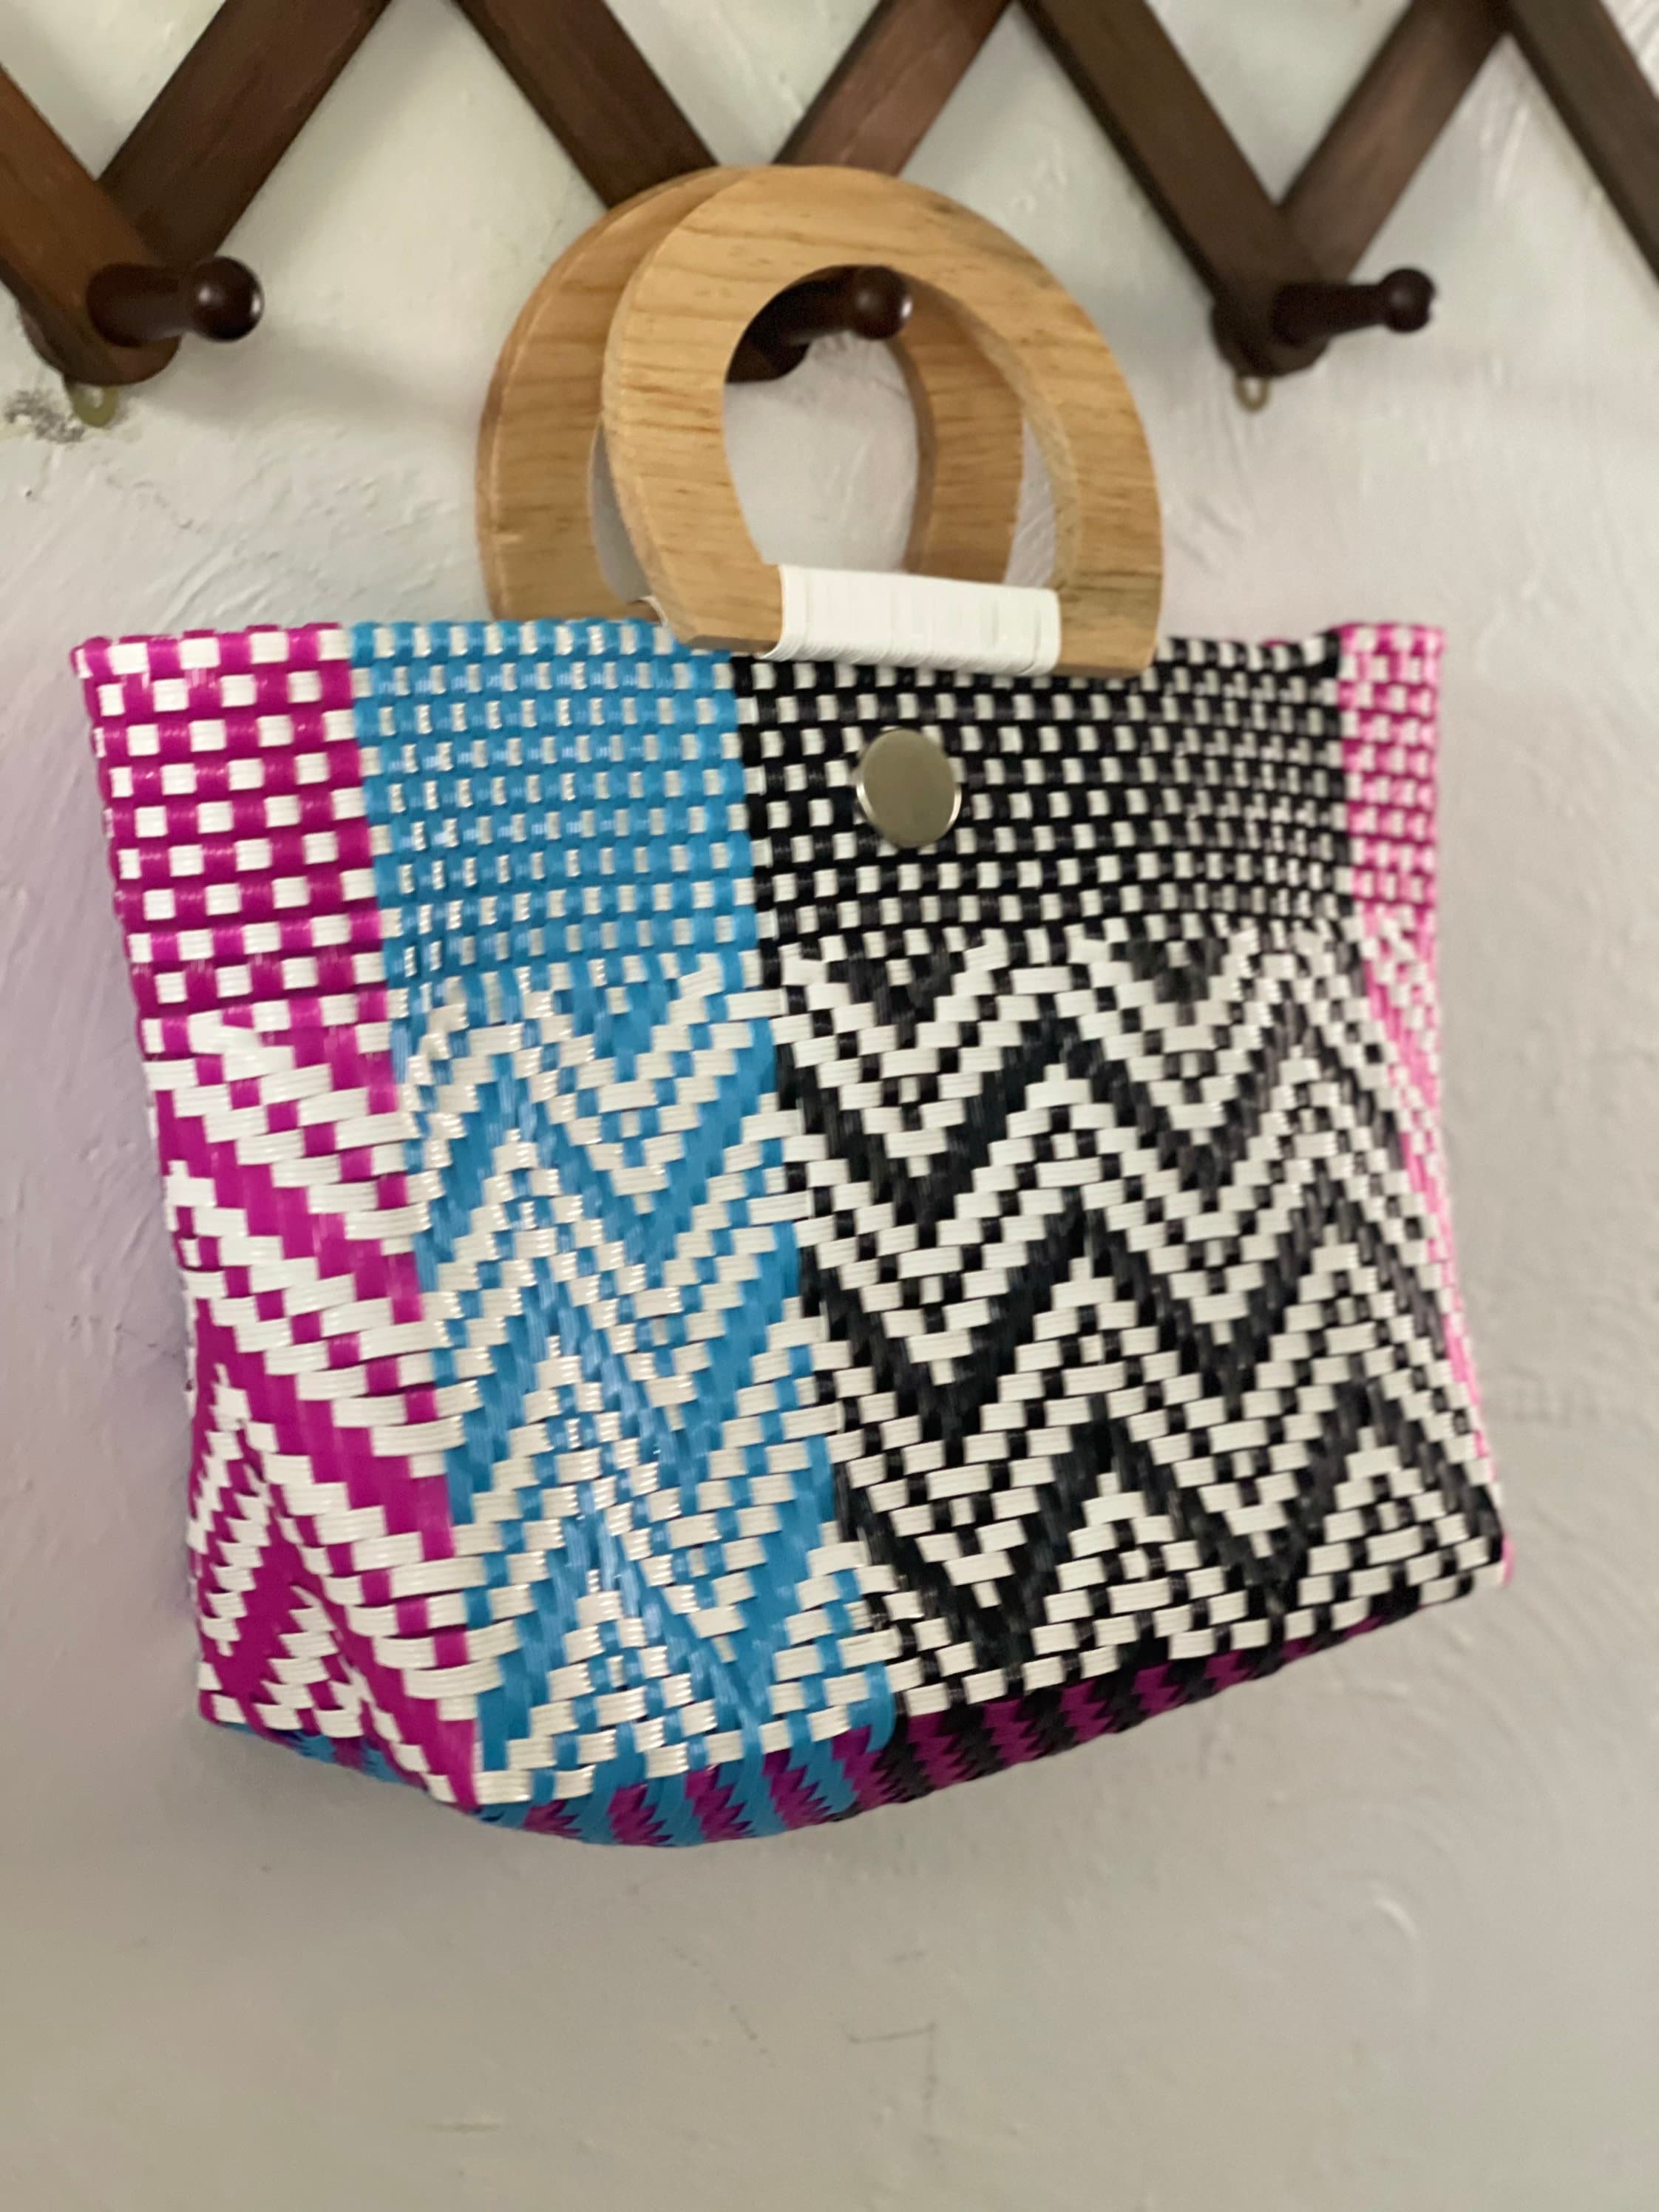 Buy Mexican Tote Bag. Recycled Plastic Bag. Mexican Bag With Charms.  Multicolor Bag. Cute Purse. Mexican Artisanal Purse. Handmade Bag. Online  in India - Etsy